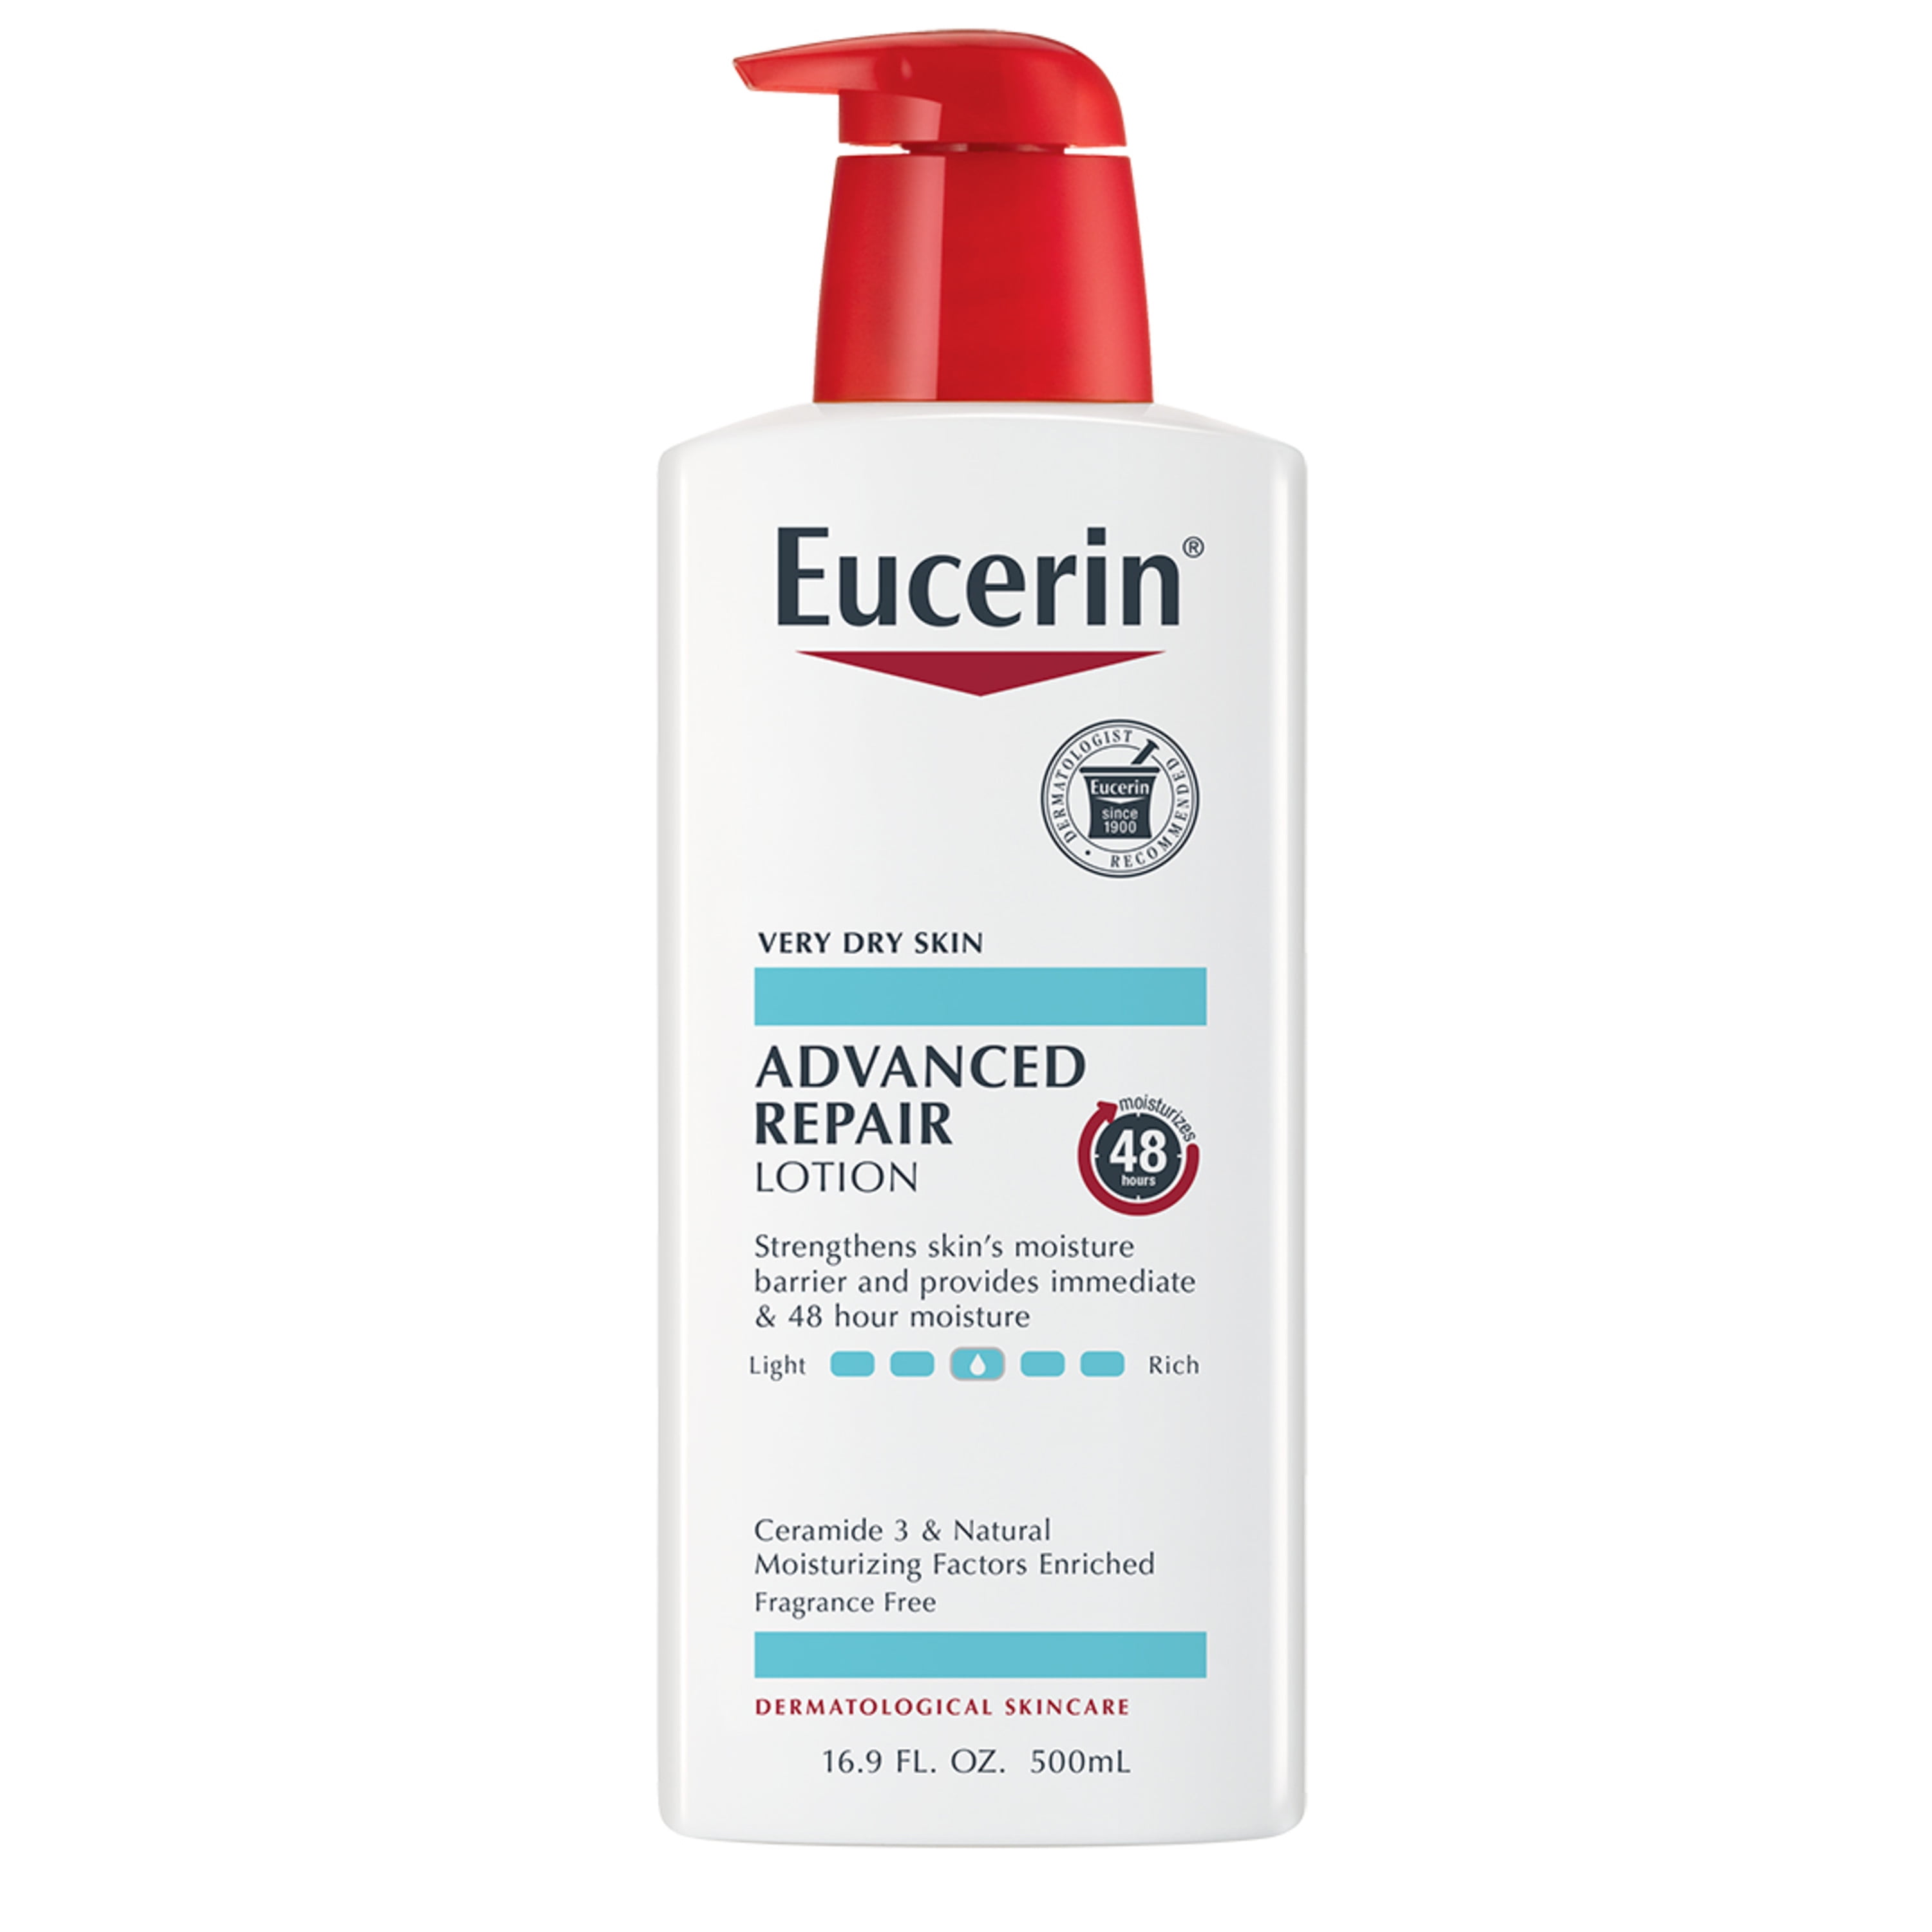 EUCERIN - Life-changing power of dermatological skincare